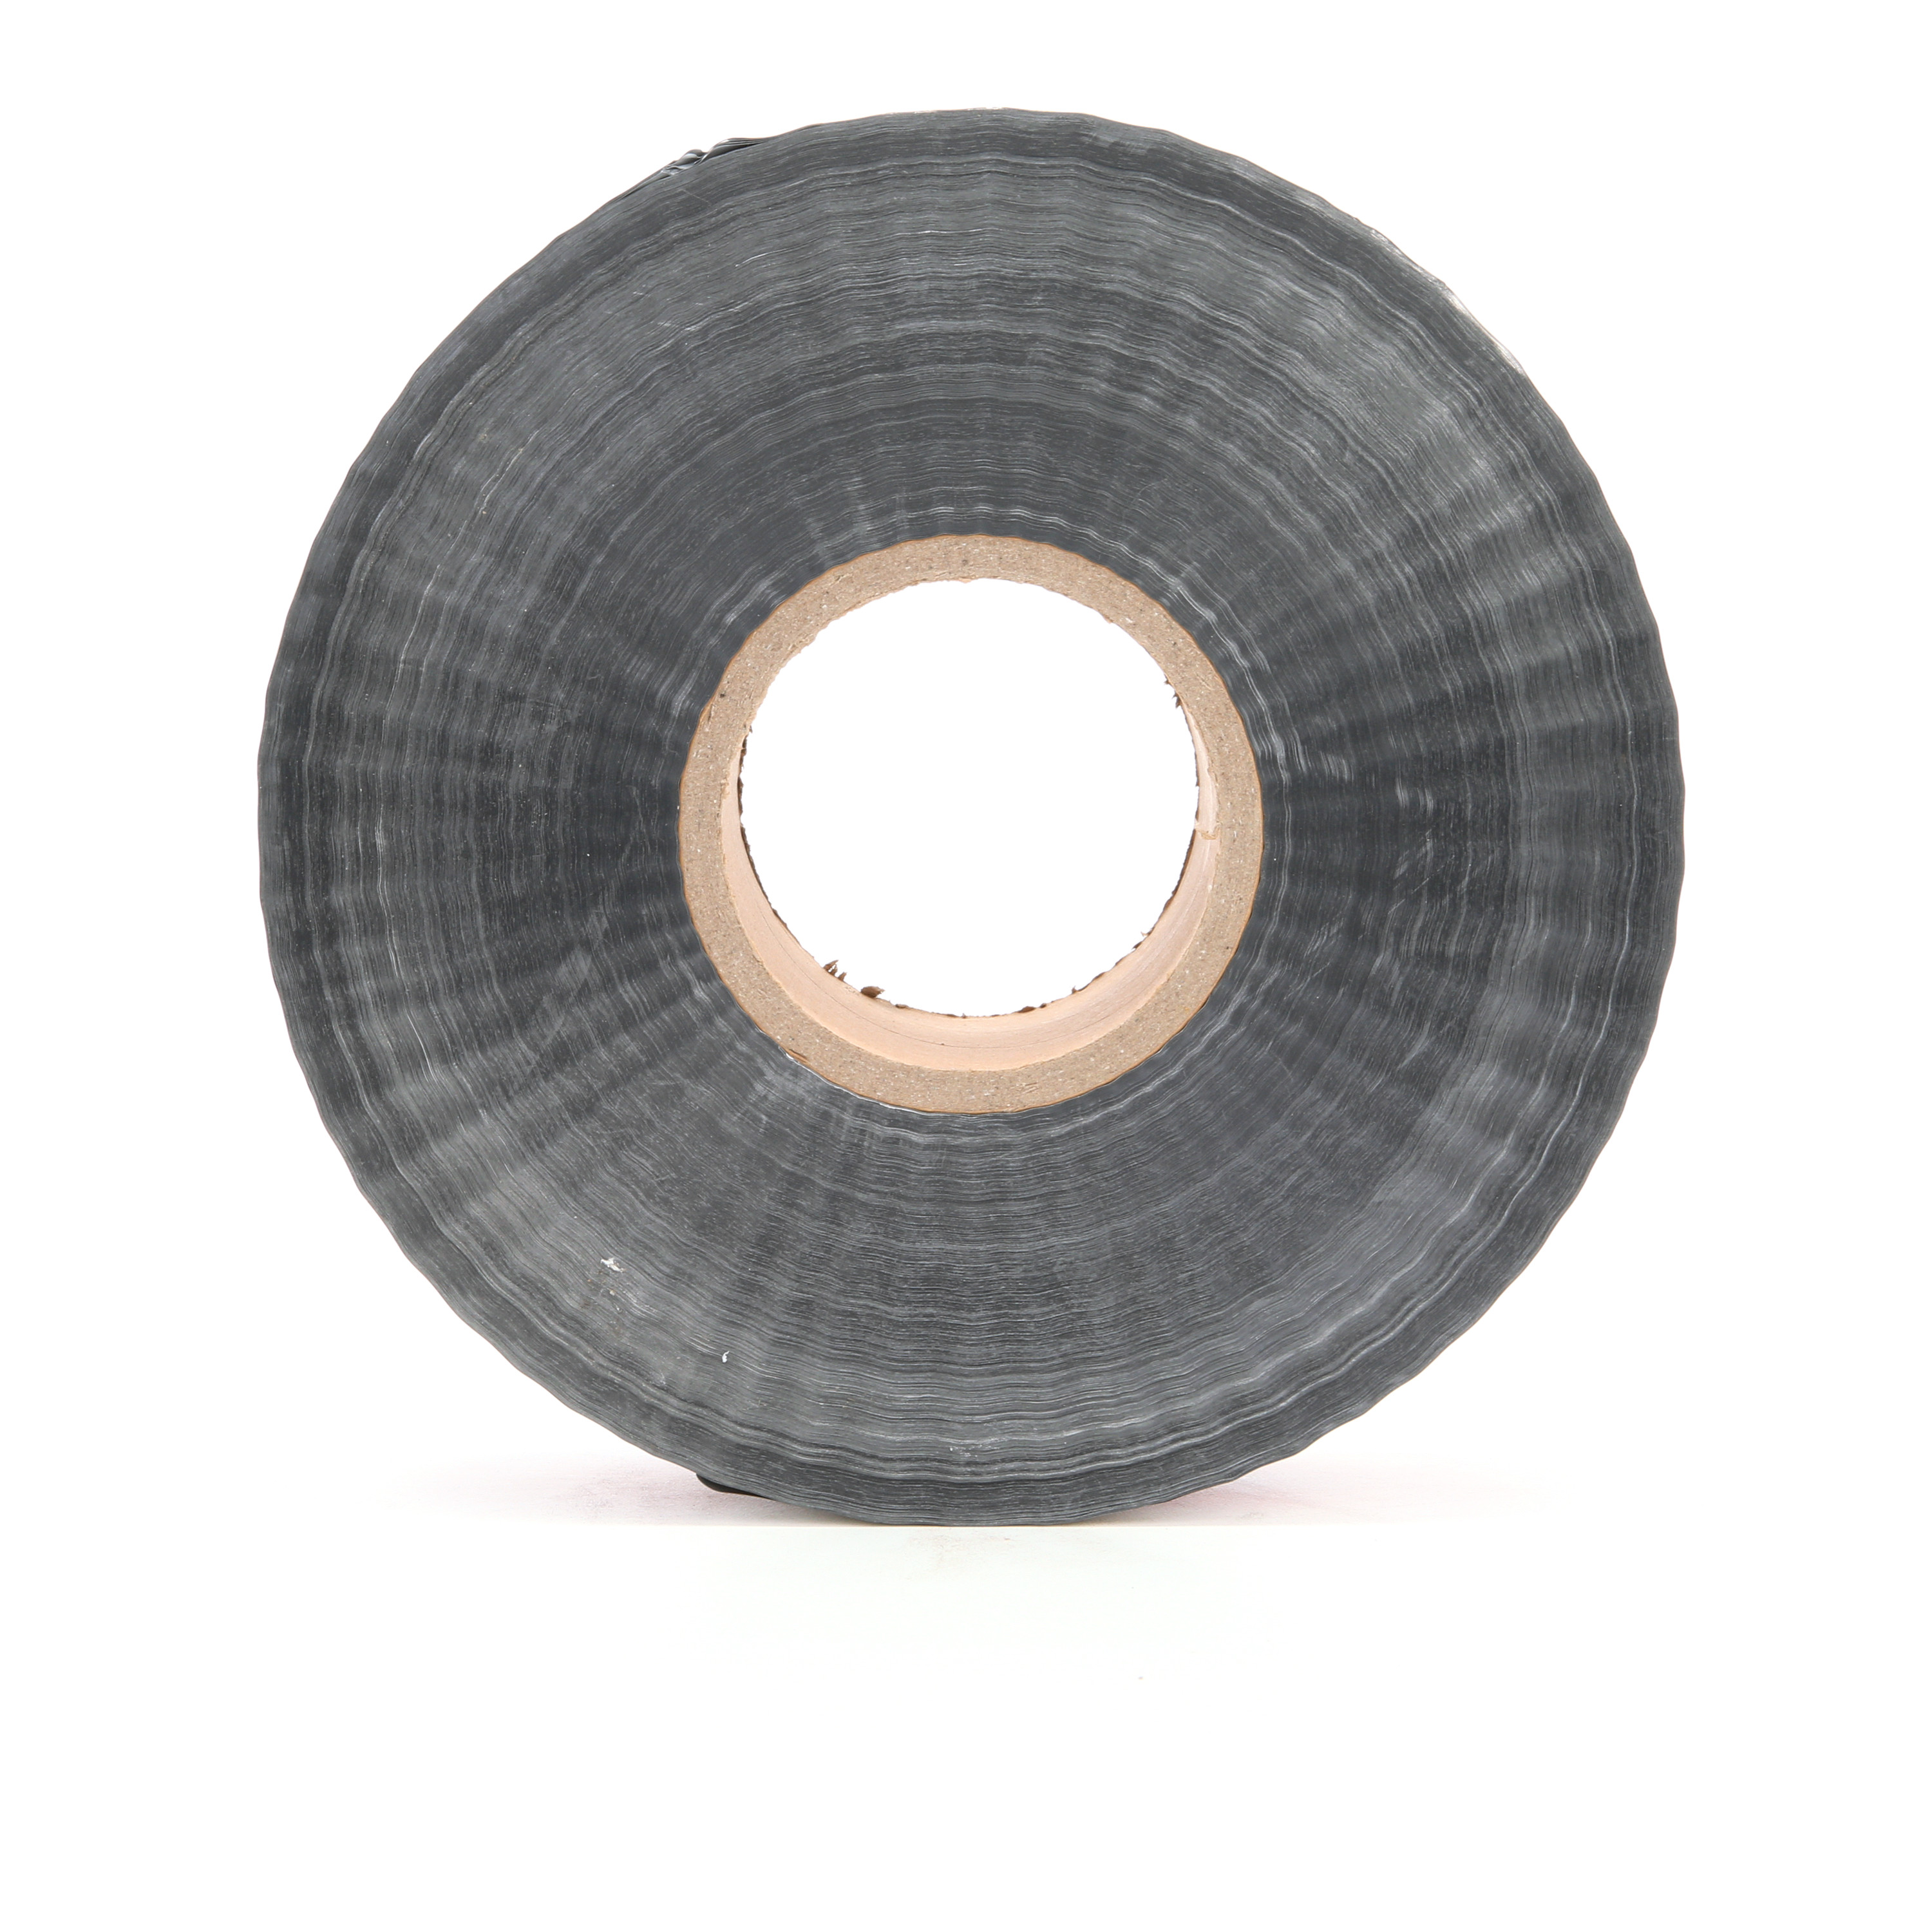 Scotch® Detectable Buried Barricade Tape 412, CAUTION BURIED HIGH
VOLTAGE CABLE BELOW, 3 in x 1000 ft, Red, 8 rolls/Case